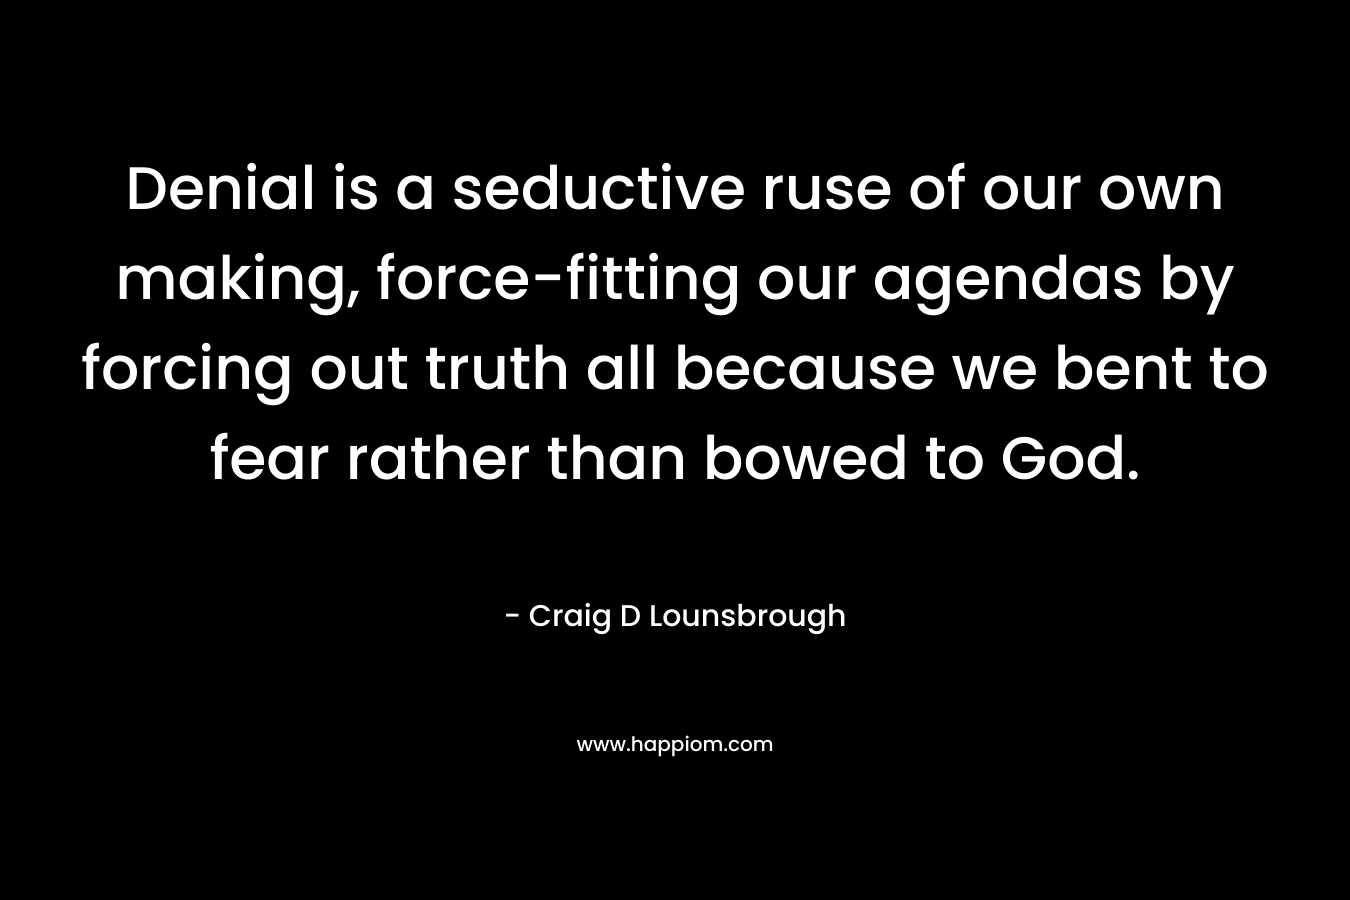 Denial is a seductive ruse of our own making, force-fitting our agendas by forcing out truth all because we bent to fear rather than bowed to God.